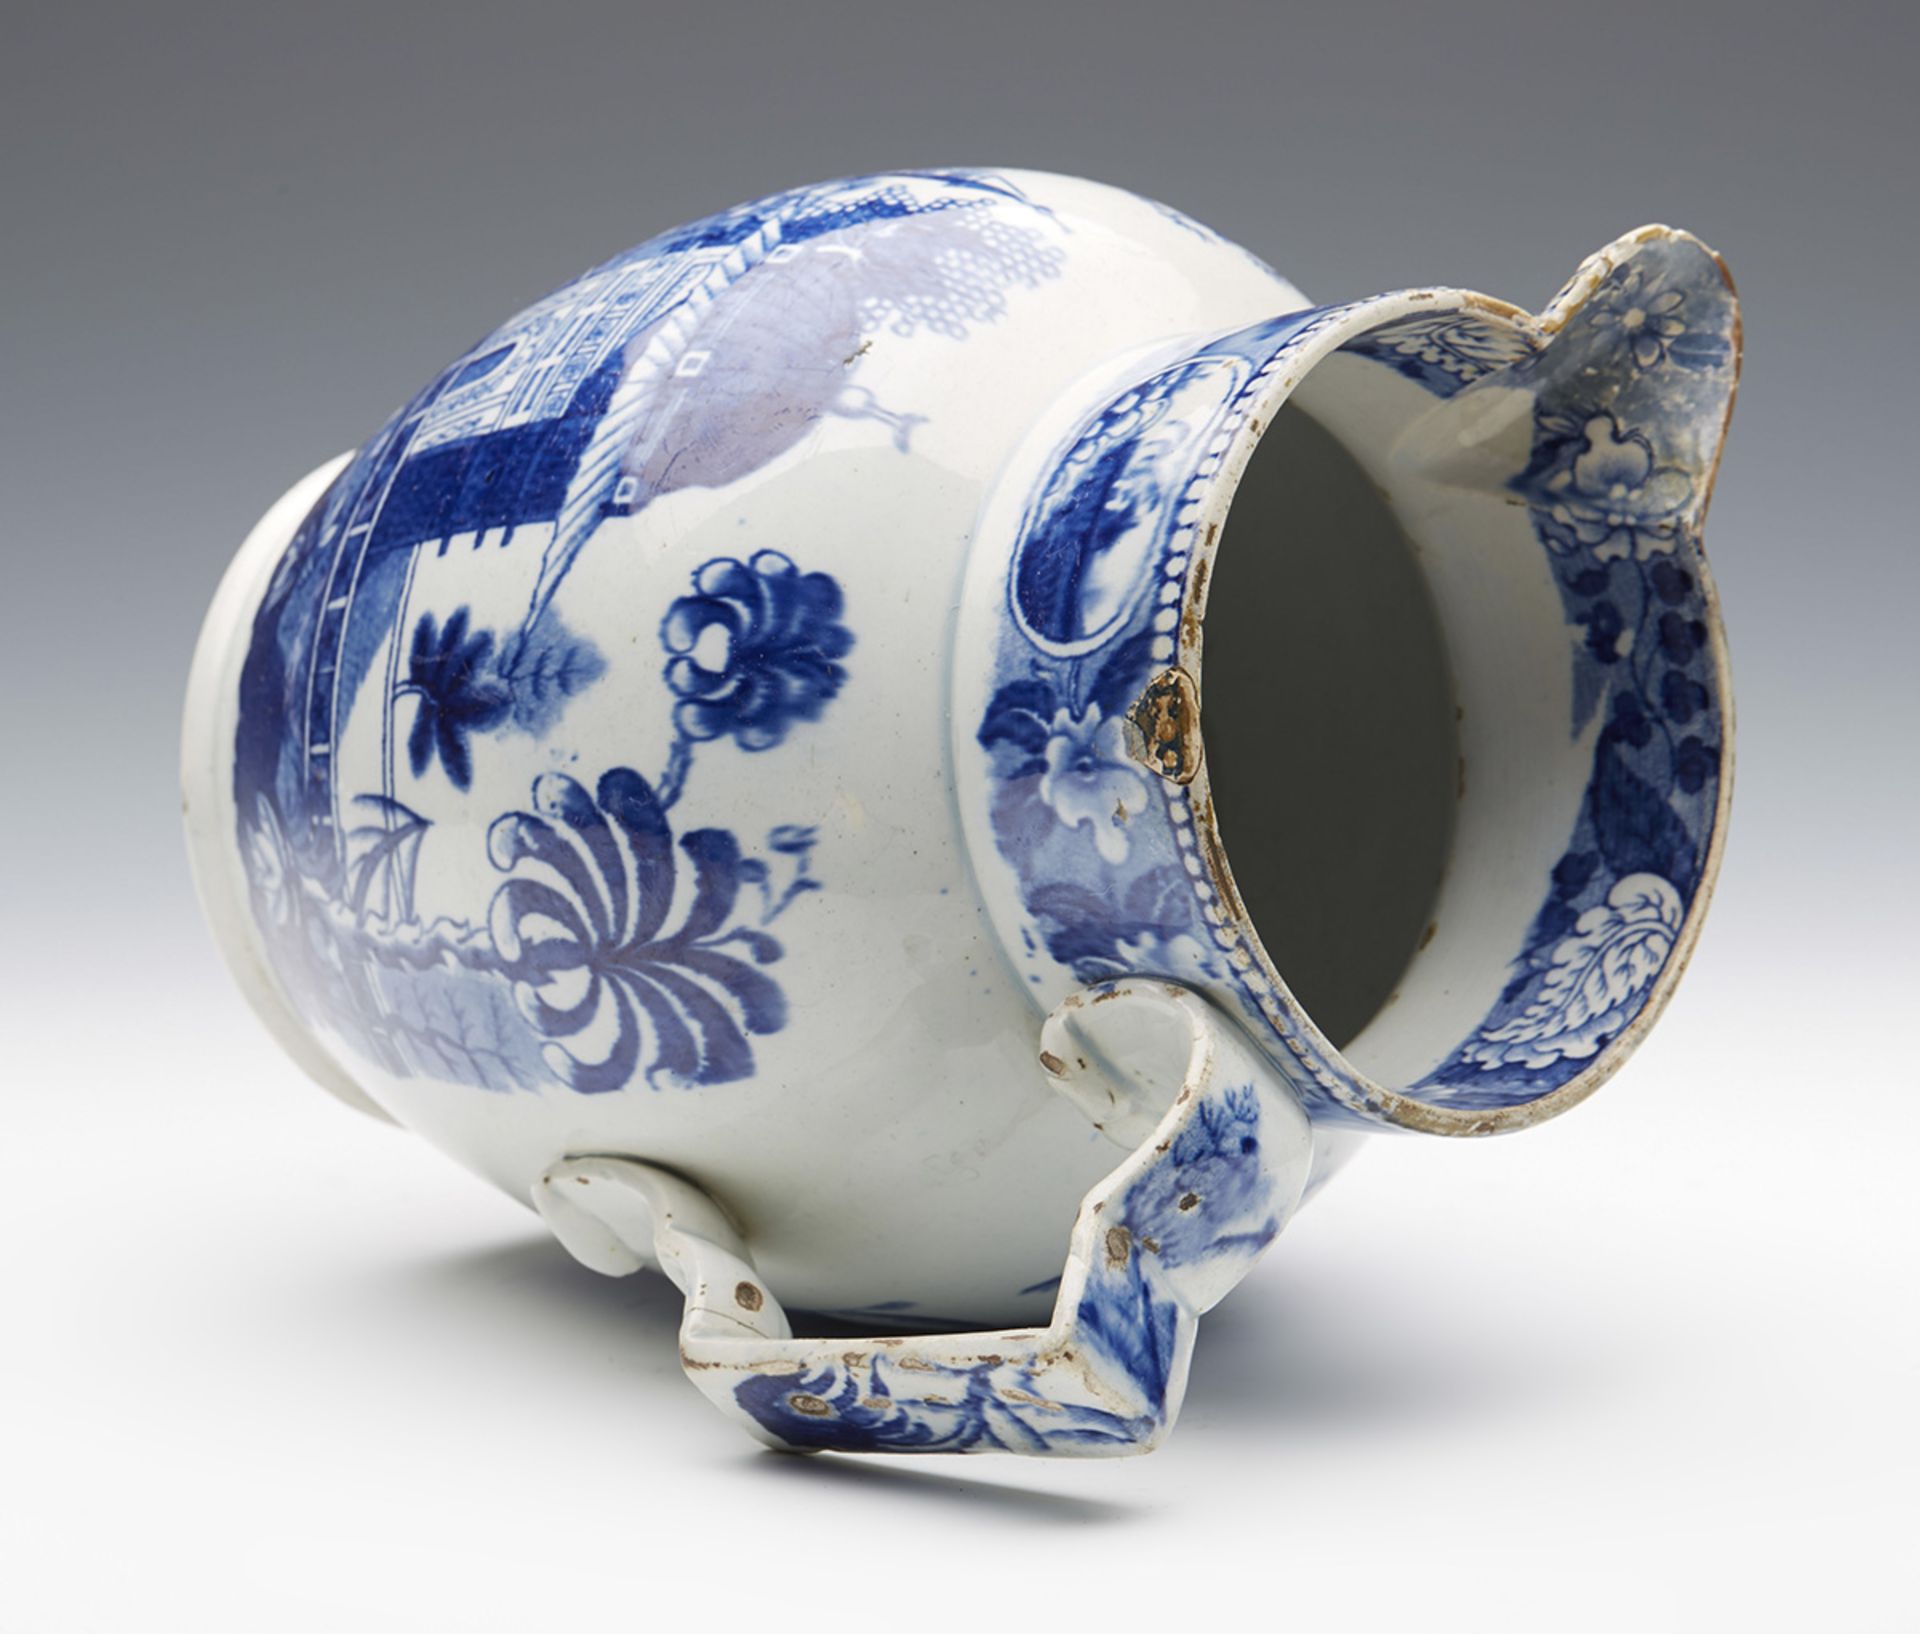 ANTIQUE ENGLISH PEARLWARE BLUE & WHITE CHINOISERIE HANDLED JUG LATE 18TH C. - Image 7 of 8